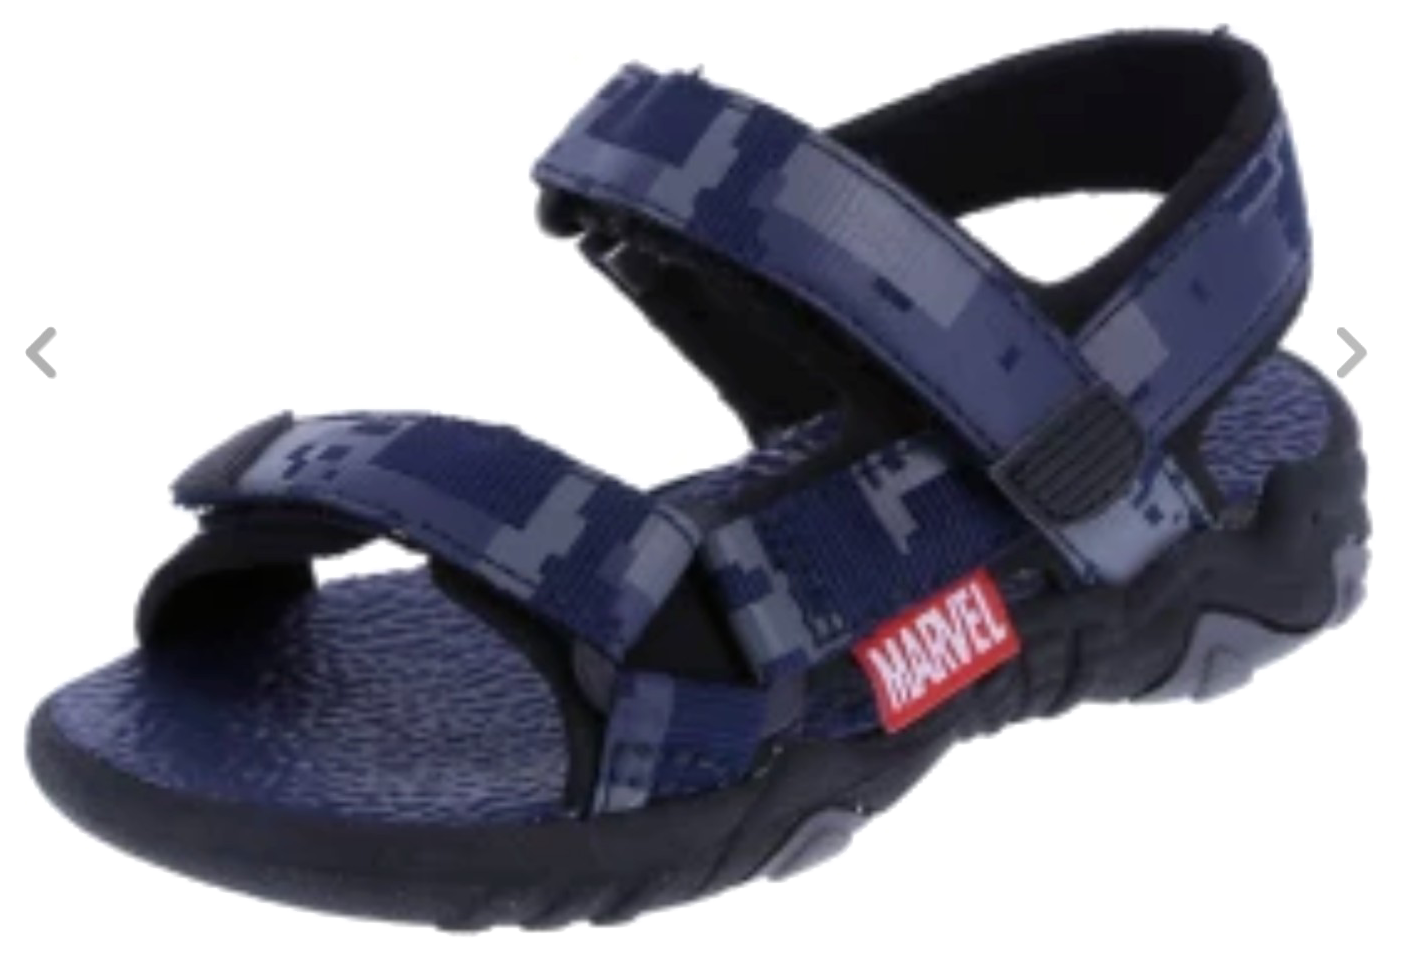 A Blue Sandal With A Camouflage Pattern On It